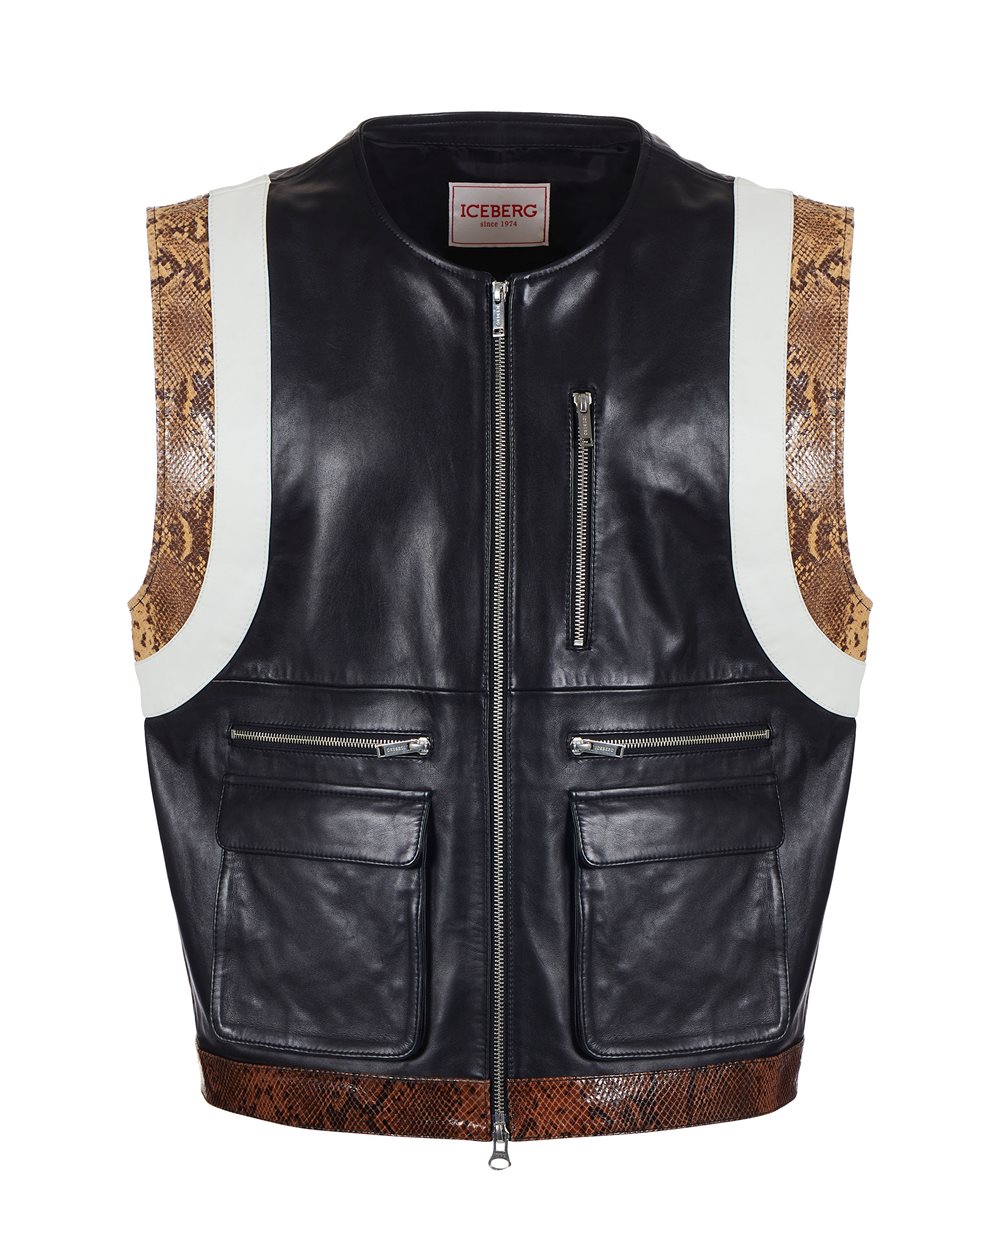 Eco-leather vest with logo - Fashion Show Man | Iceberg - Official Website